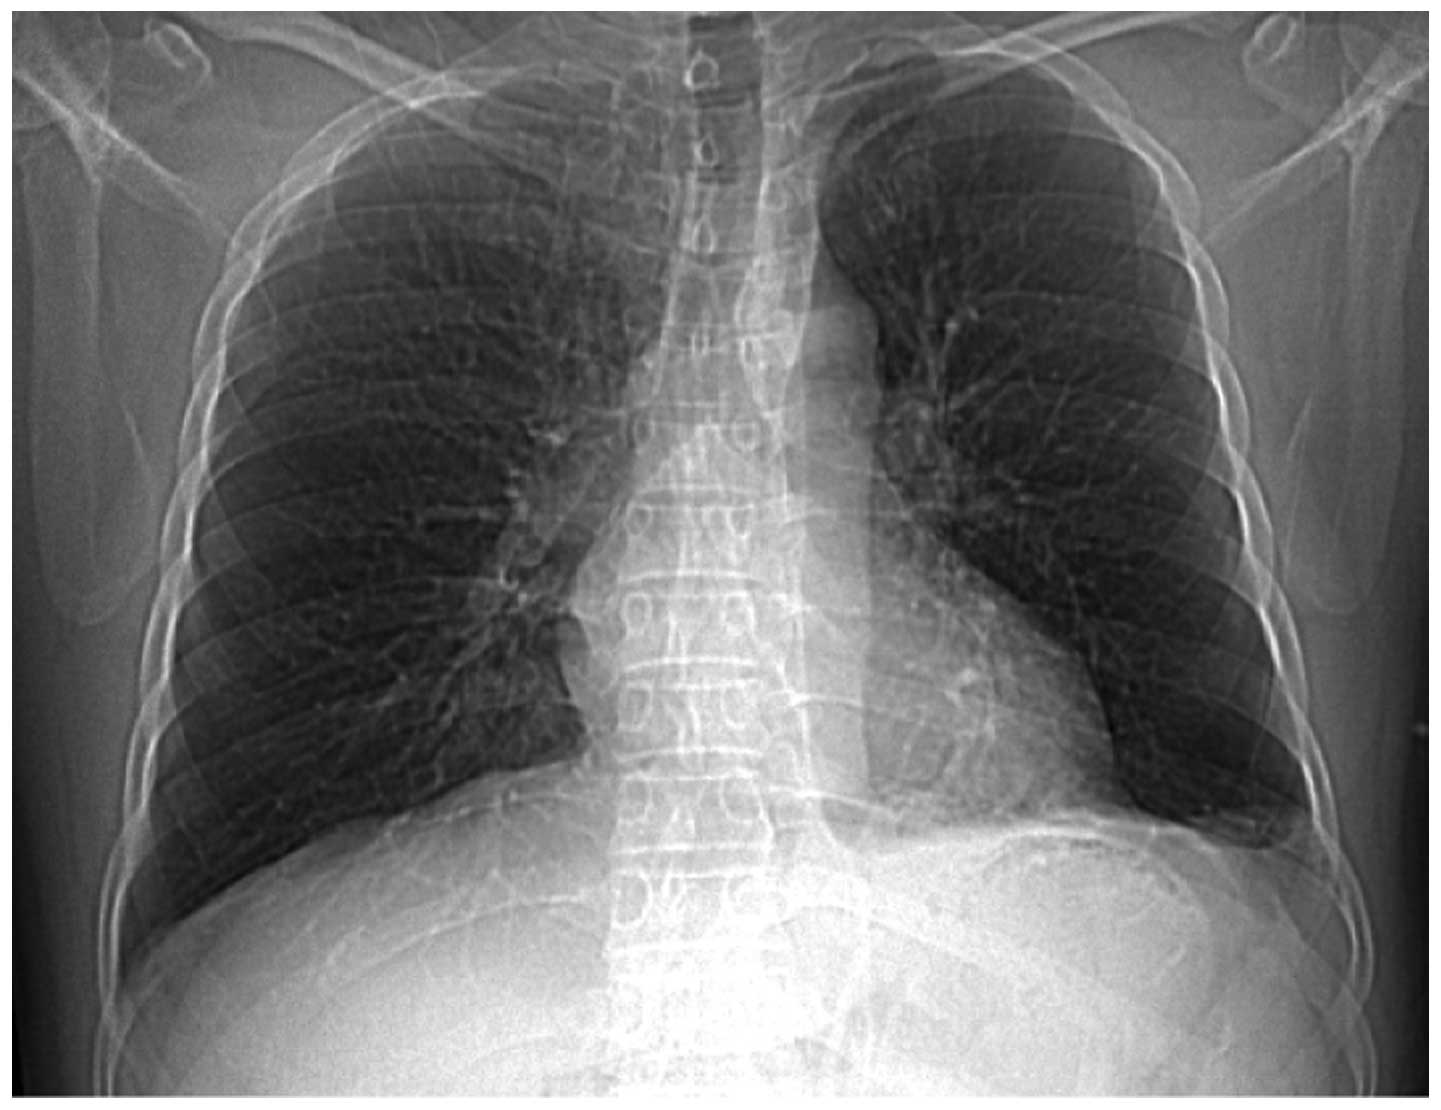 Pulmonary sequestration presenting with left upper abdominal bloating